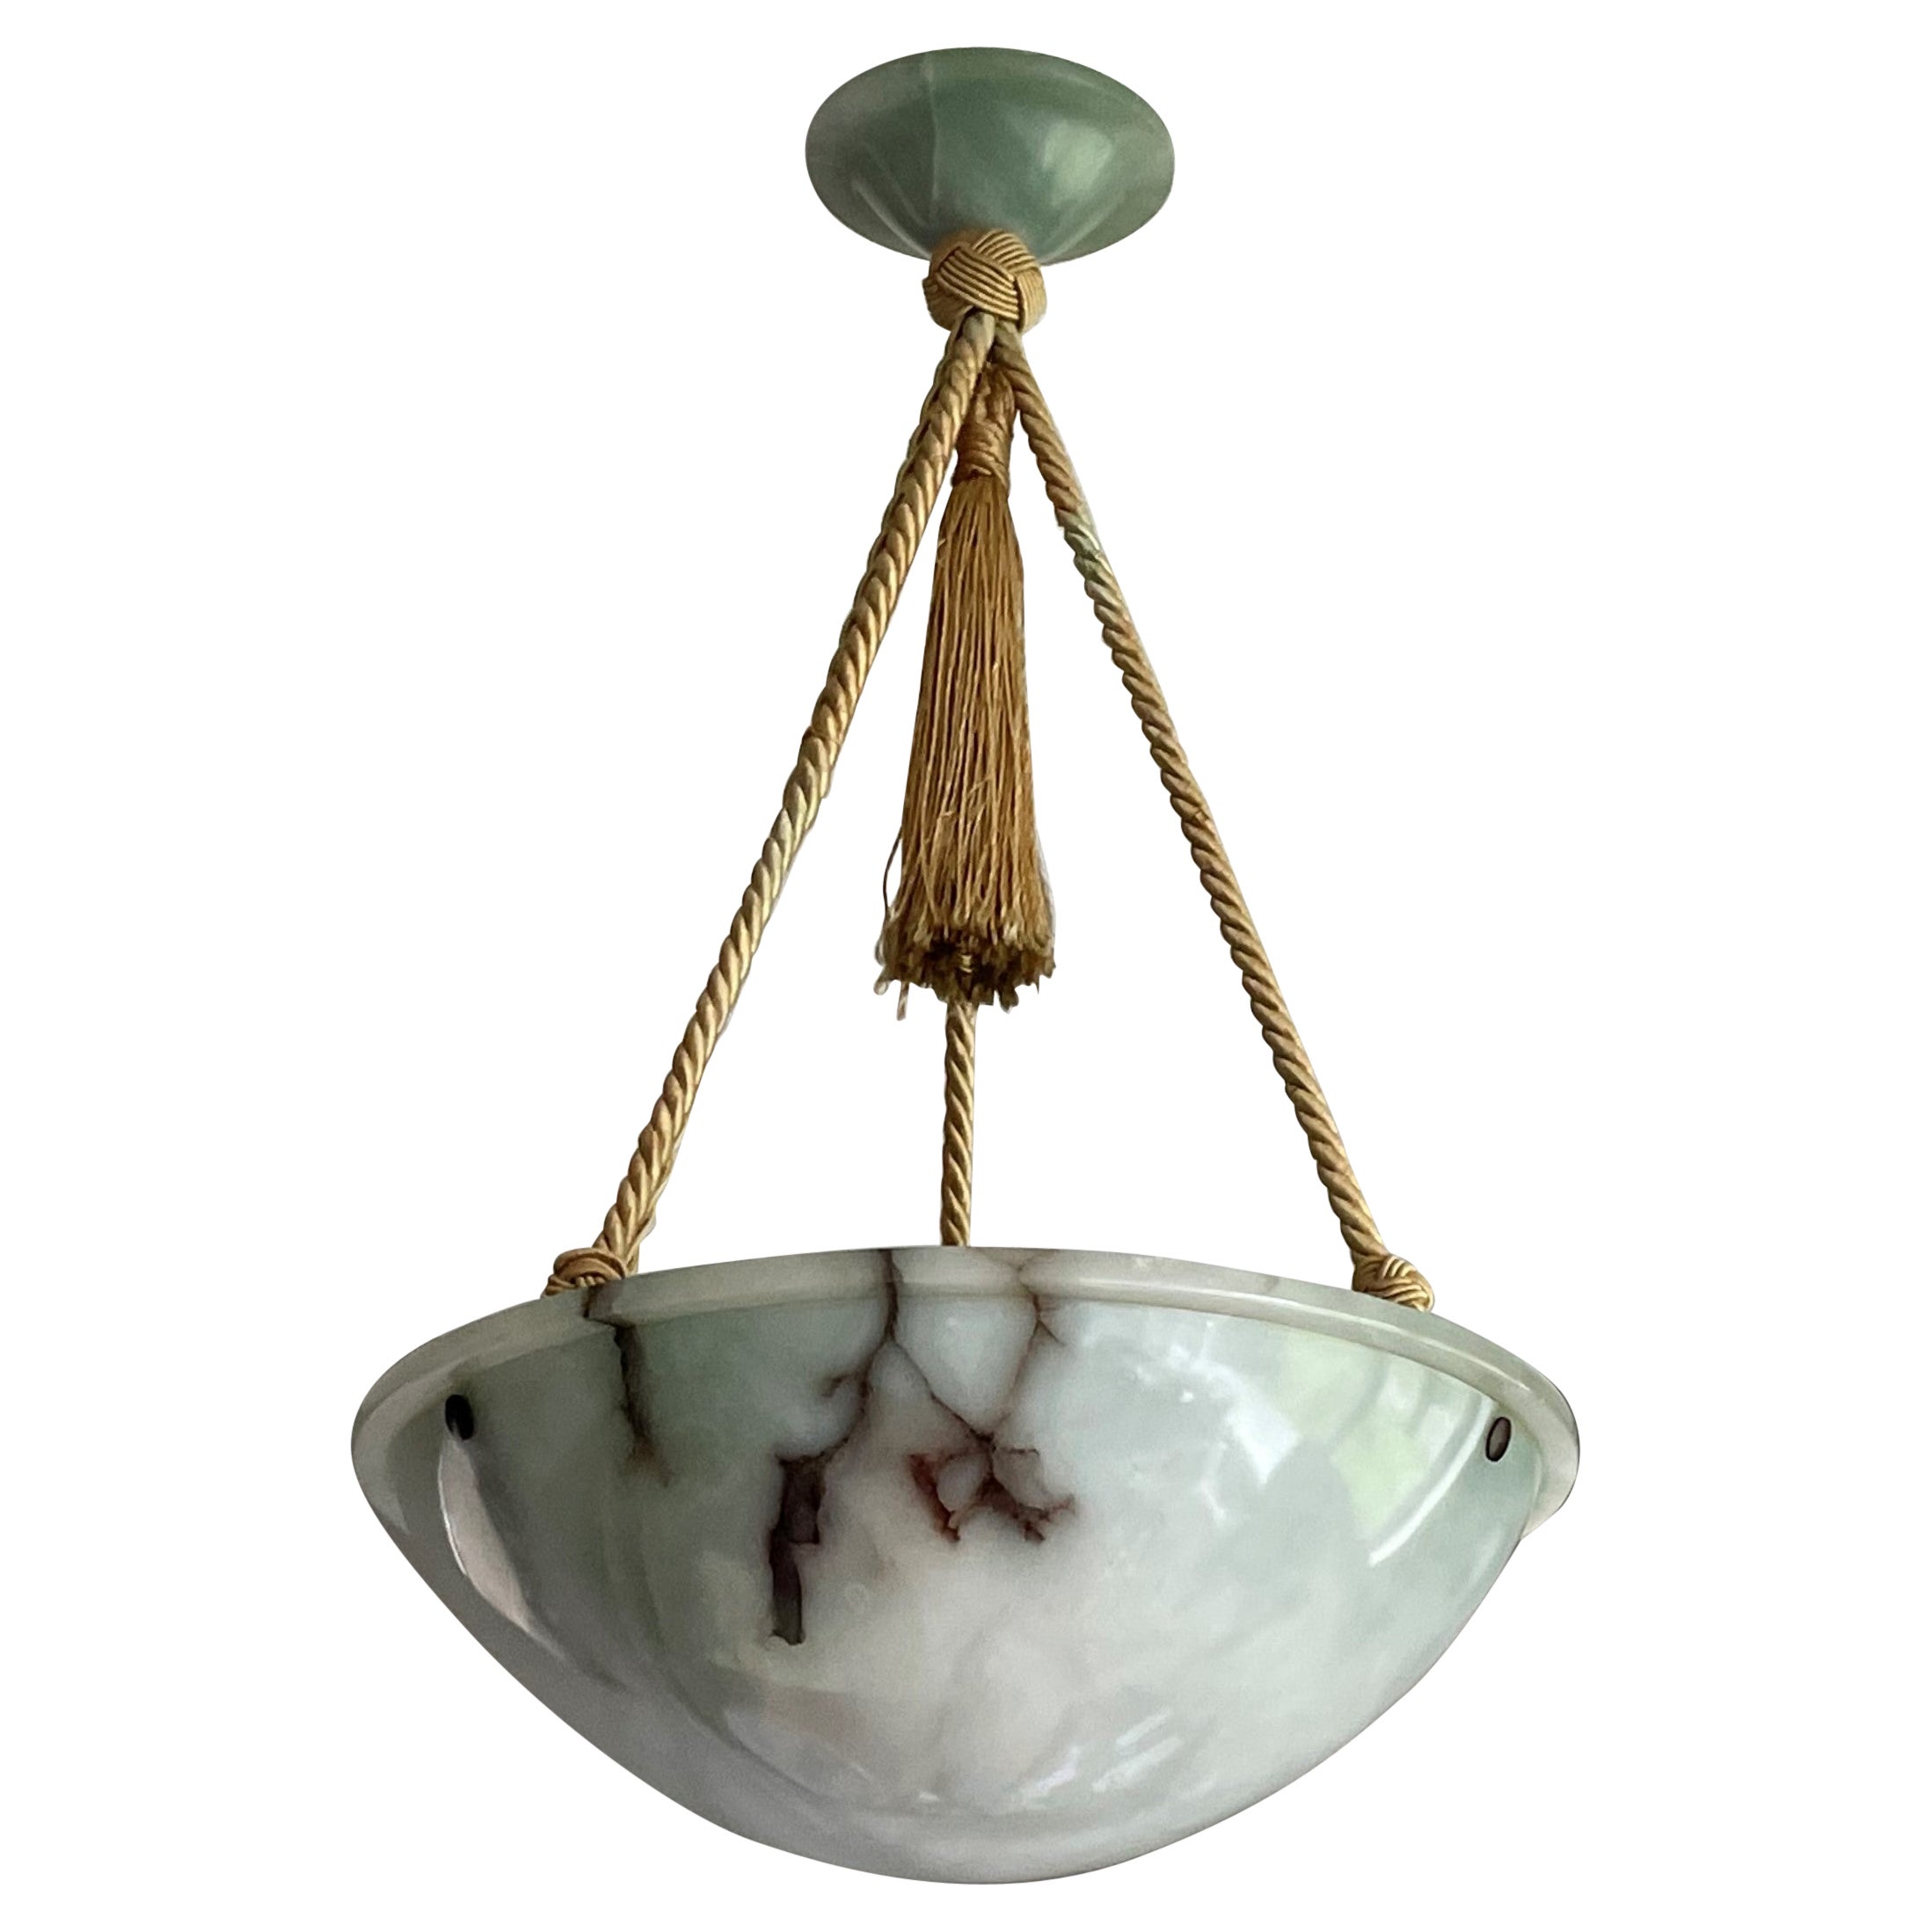 Striking Art Deco Pendant / Flushmount with Mint Green Alabaster Shade & Canopy